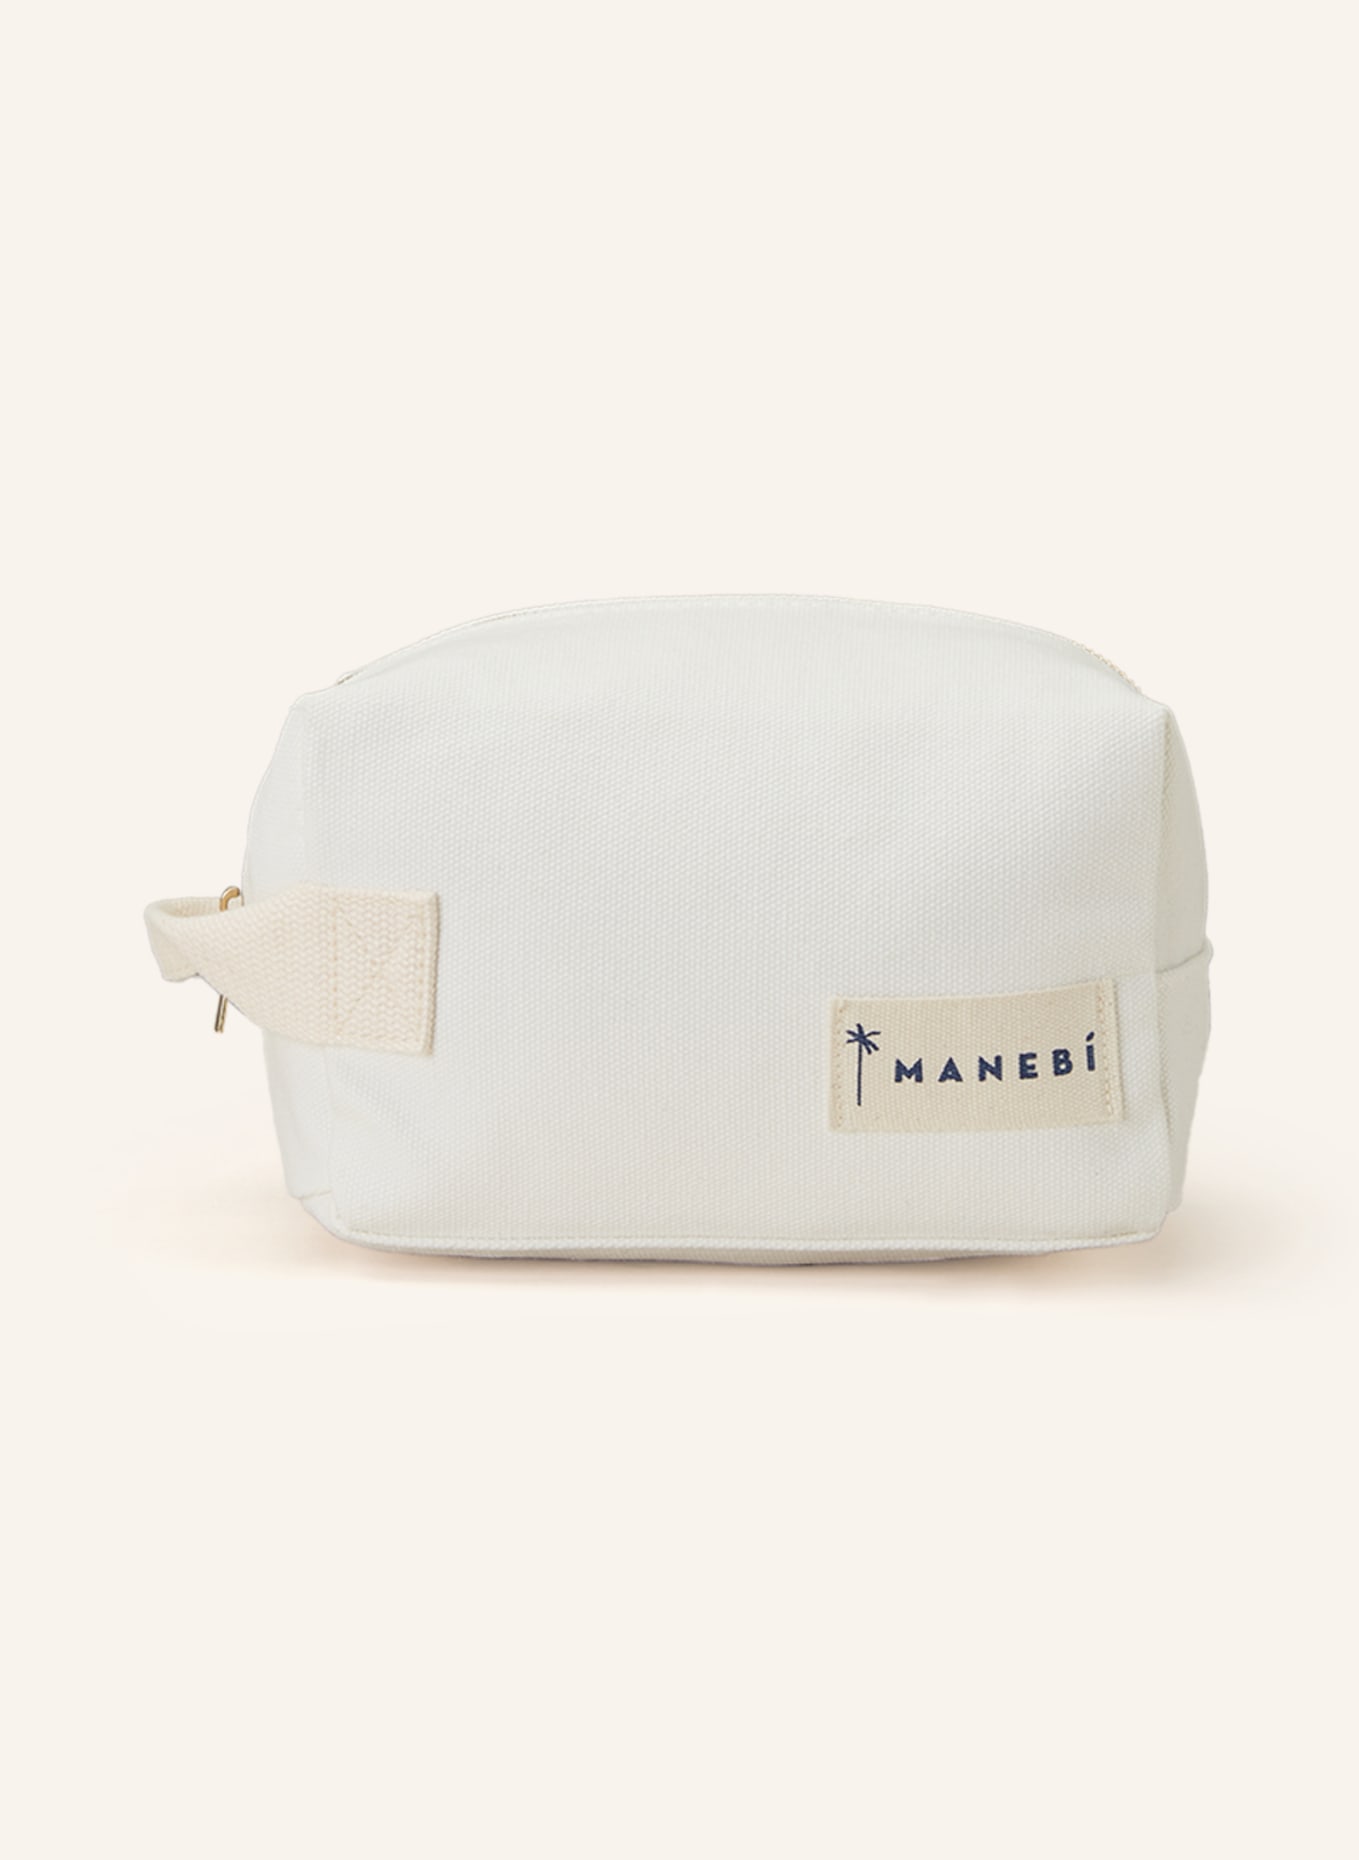 MANEBÍ Toiletry bag LARGE BEAUTY, Color: WHITE (Image 1)